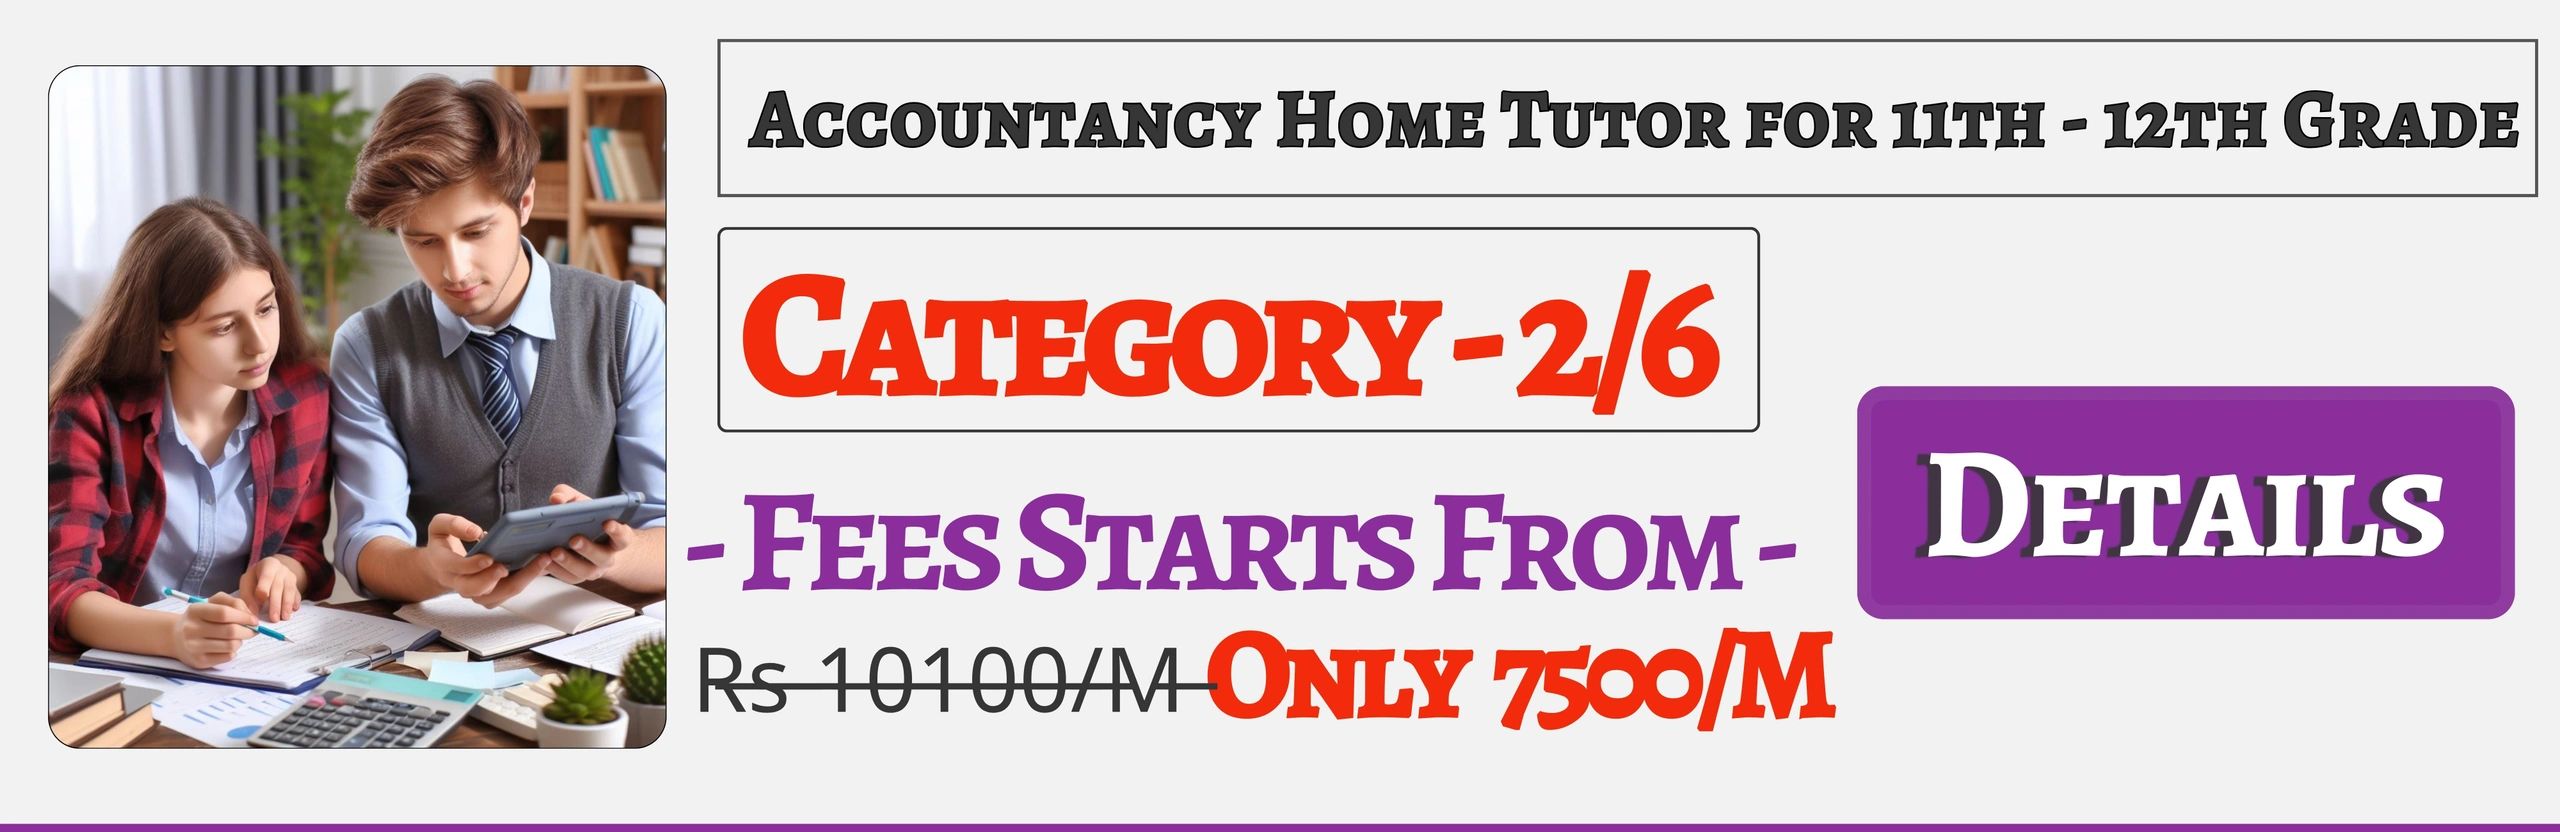 Book Best Nearby Accountancy Home Tuition Tutors For 11th & 12th Jaipur ,Fees Only 7500/M